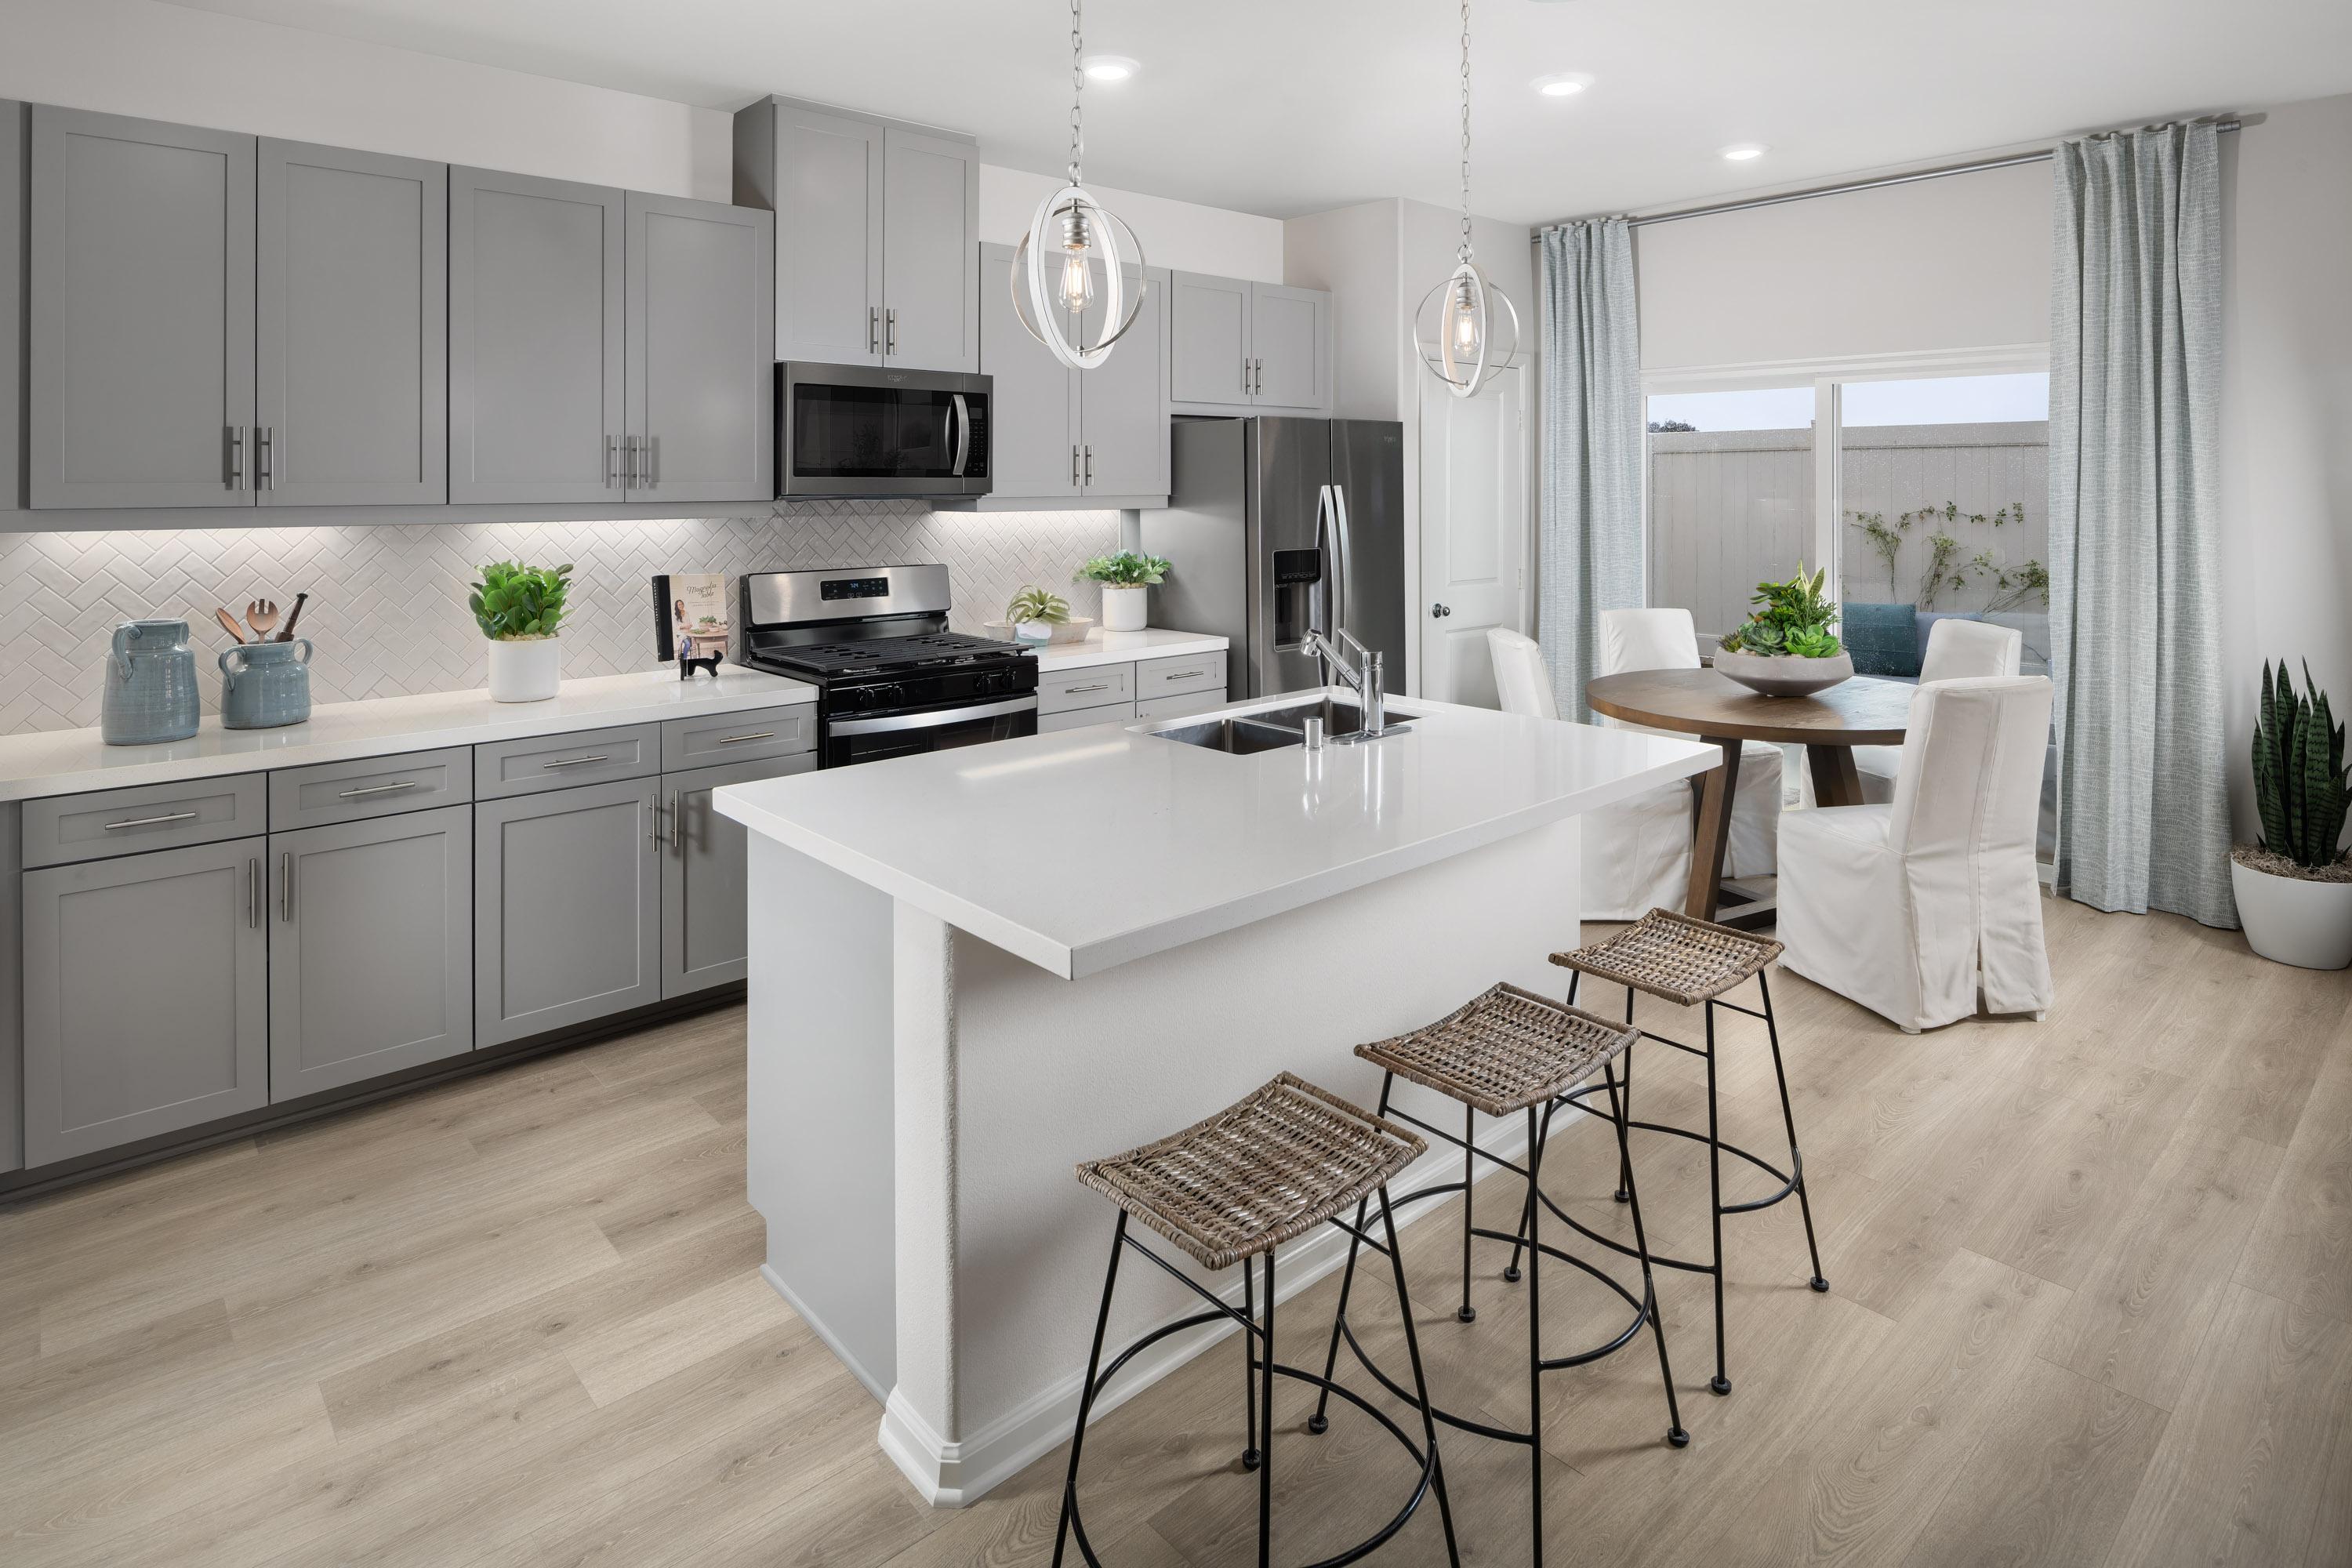 Kitchen with center island. Beazer Homes is now building 100% Energy Series READY homes in Southern California. 